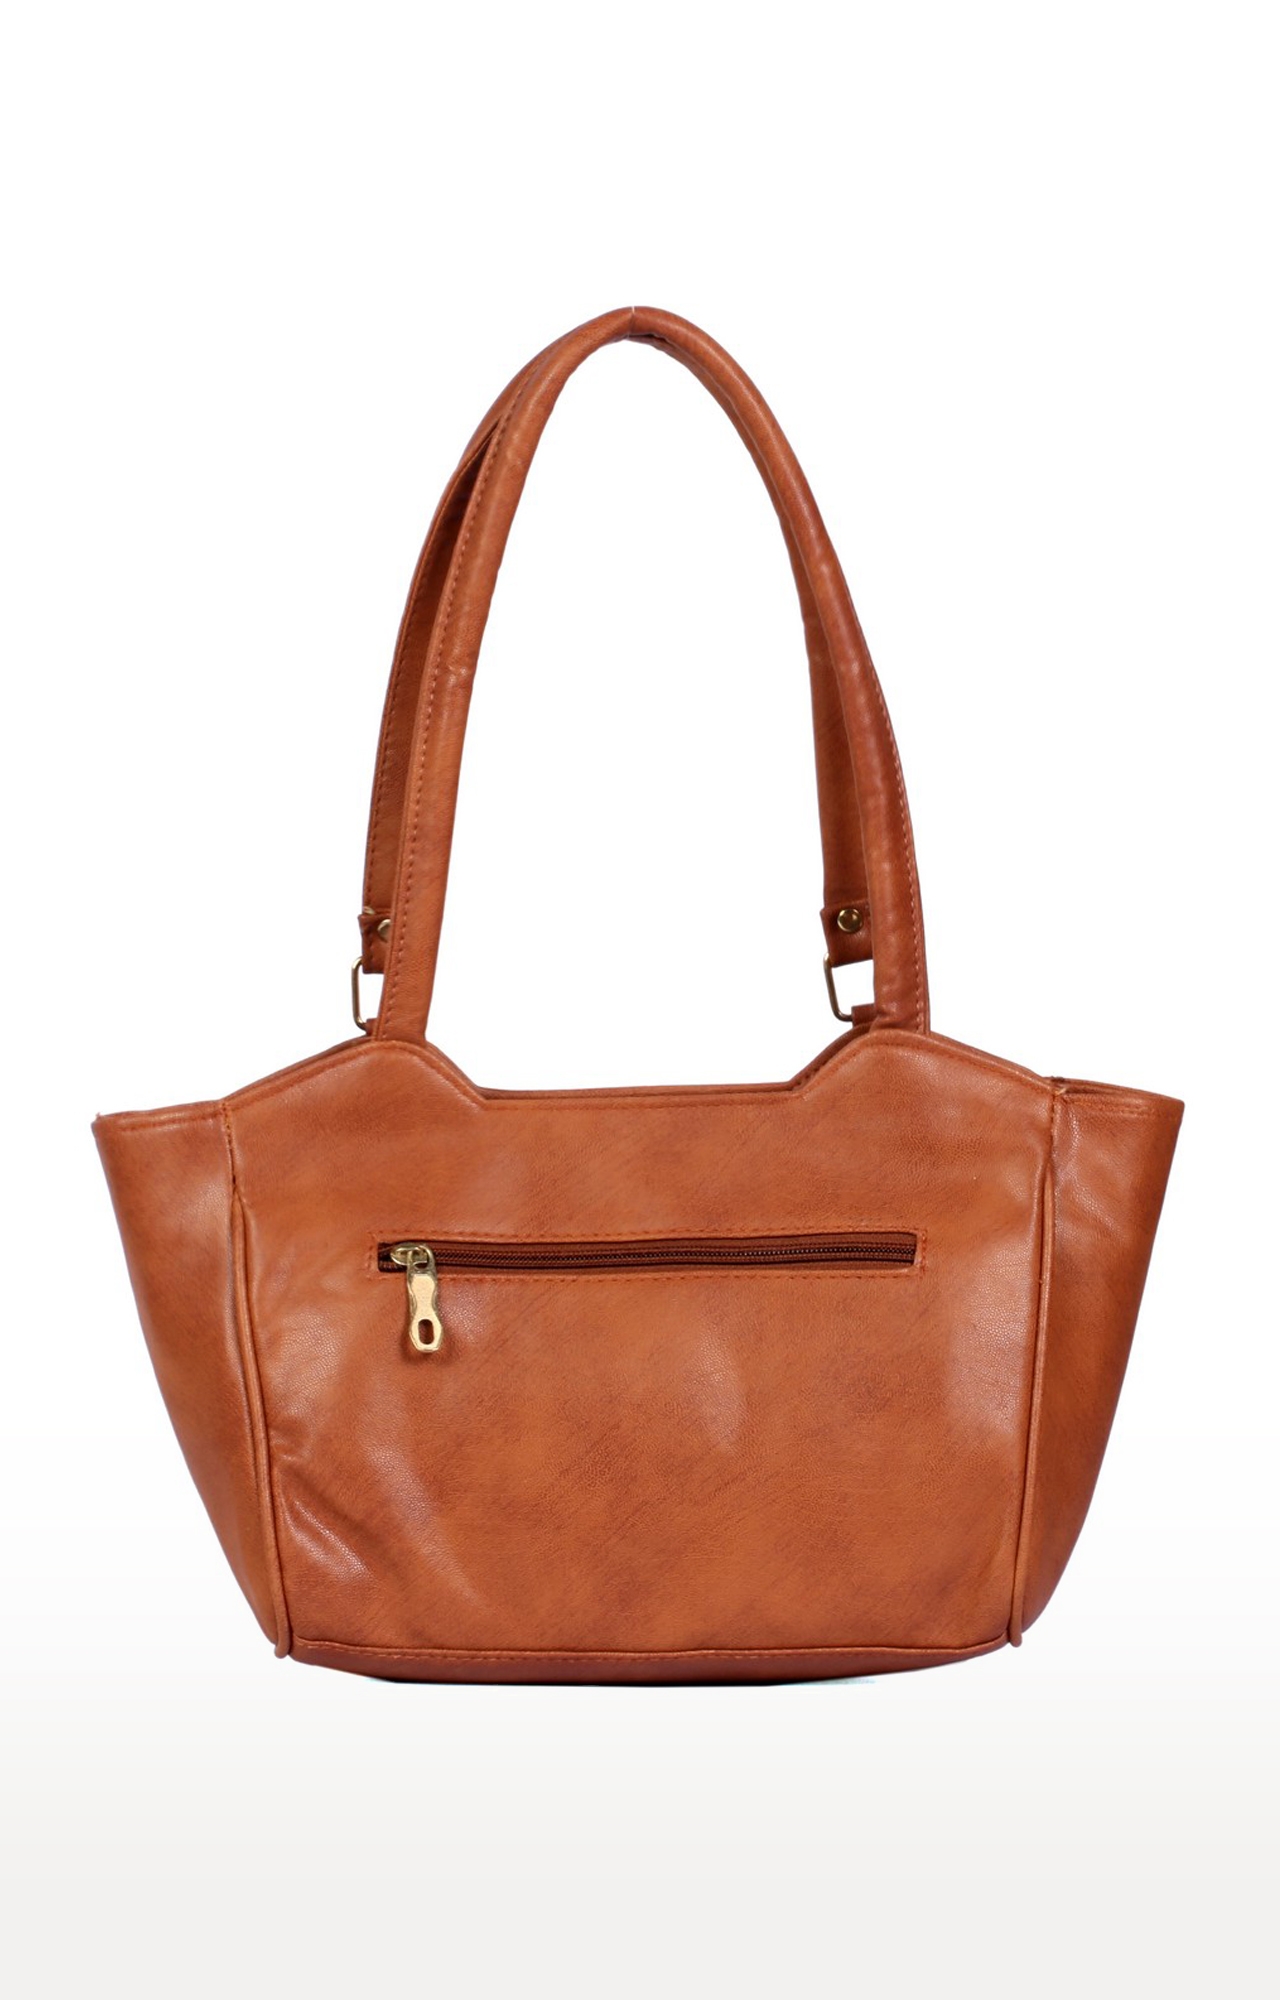 Lely's Beautiful Women's Handbag With Latest Shades -Brown